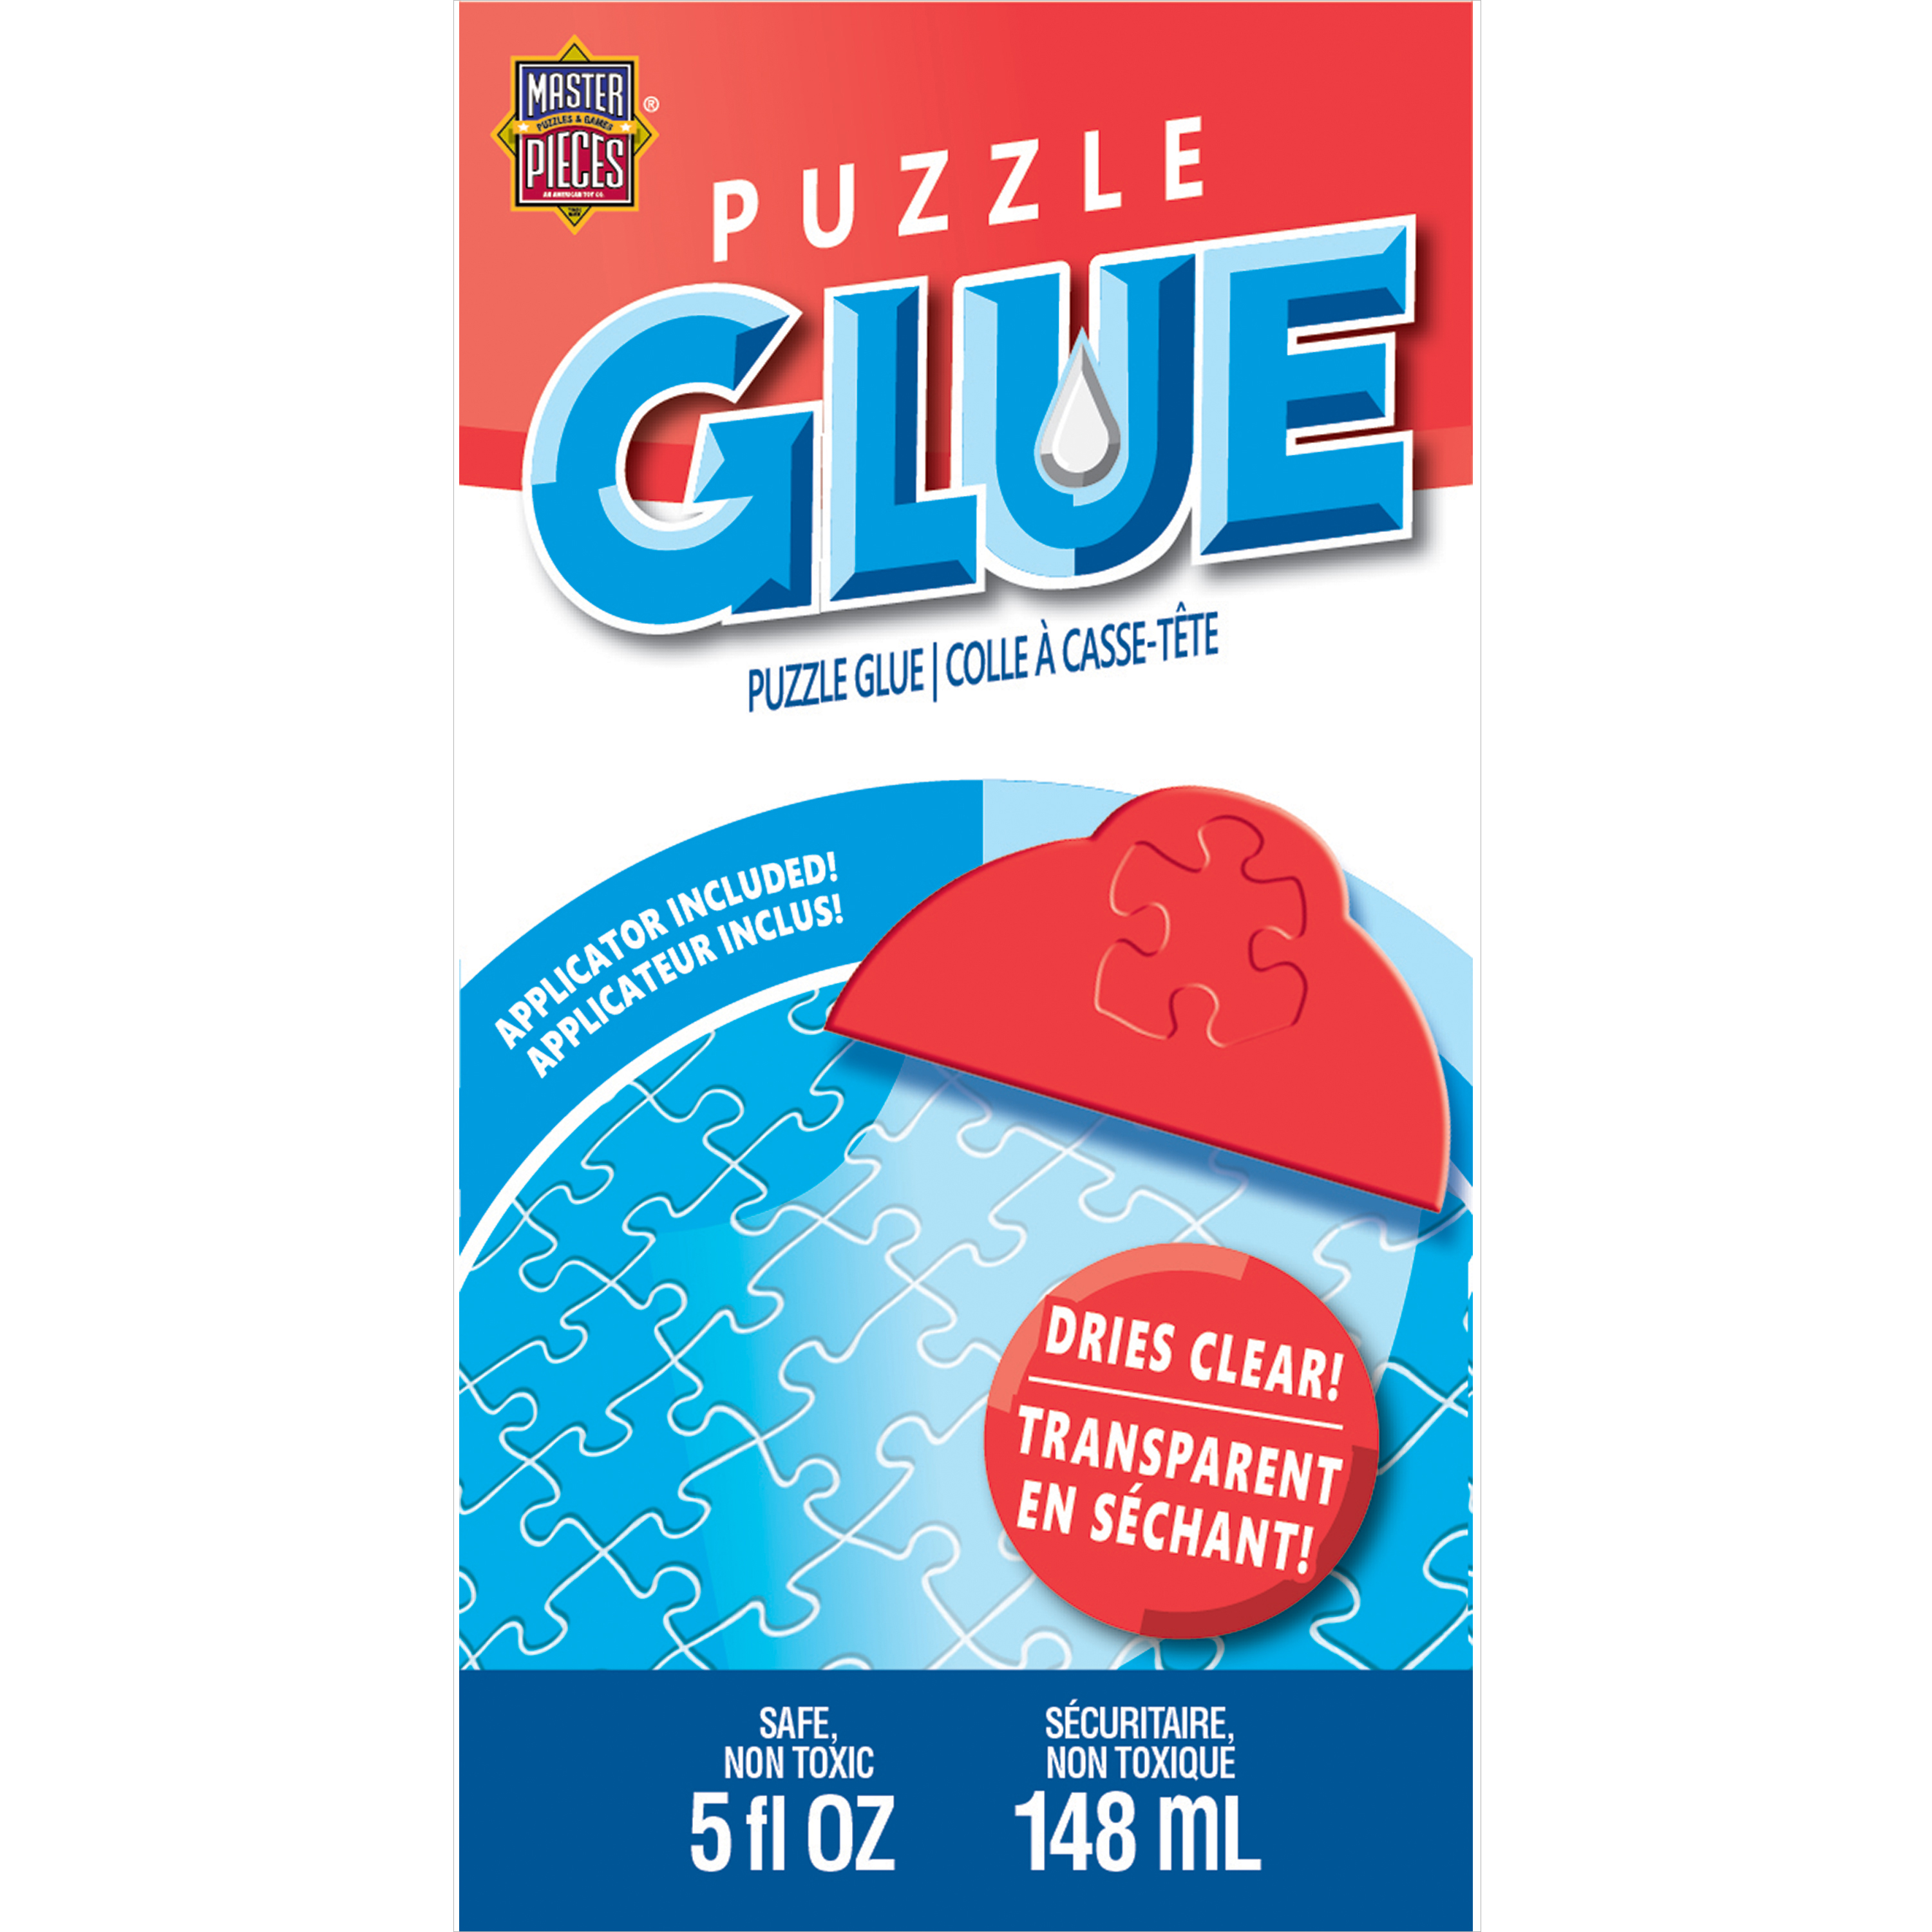 MasterPieces® Puzzle Glue with Applicator